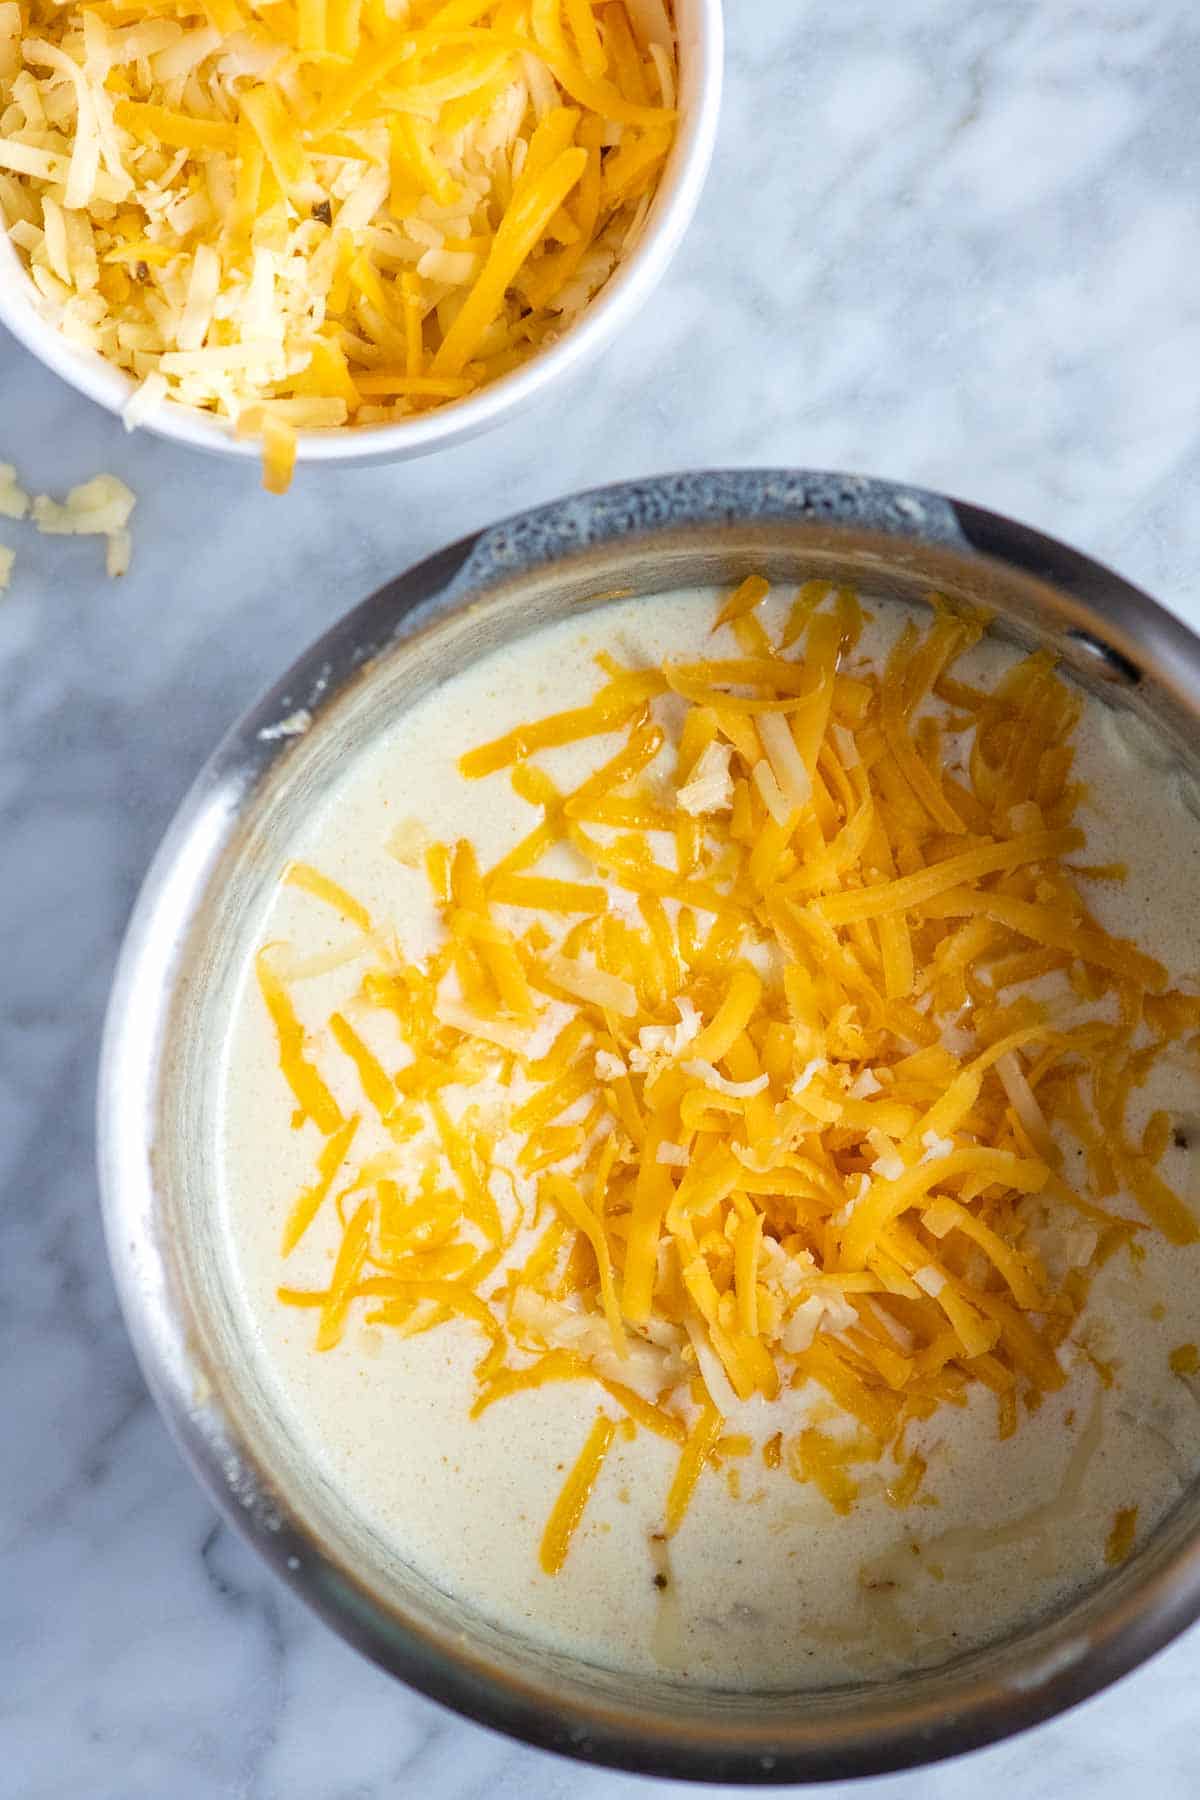 Adding cheese to make queso dip